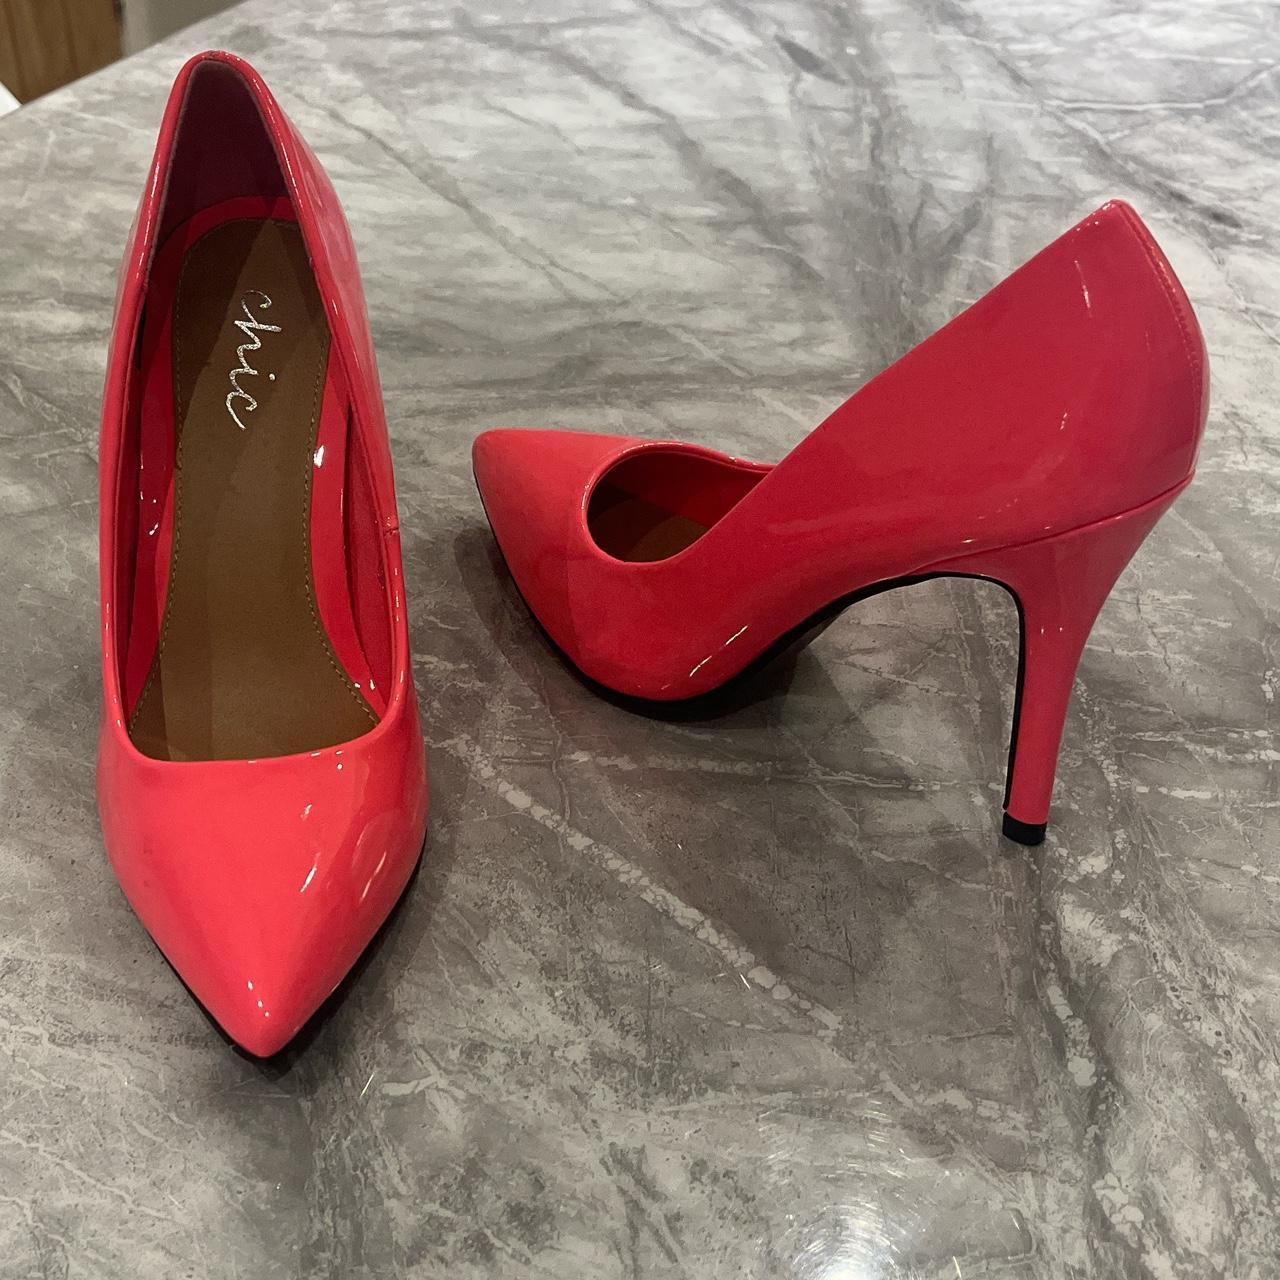 Neon pink court shoe size 6 runs small to size - Depop